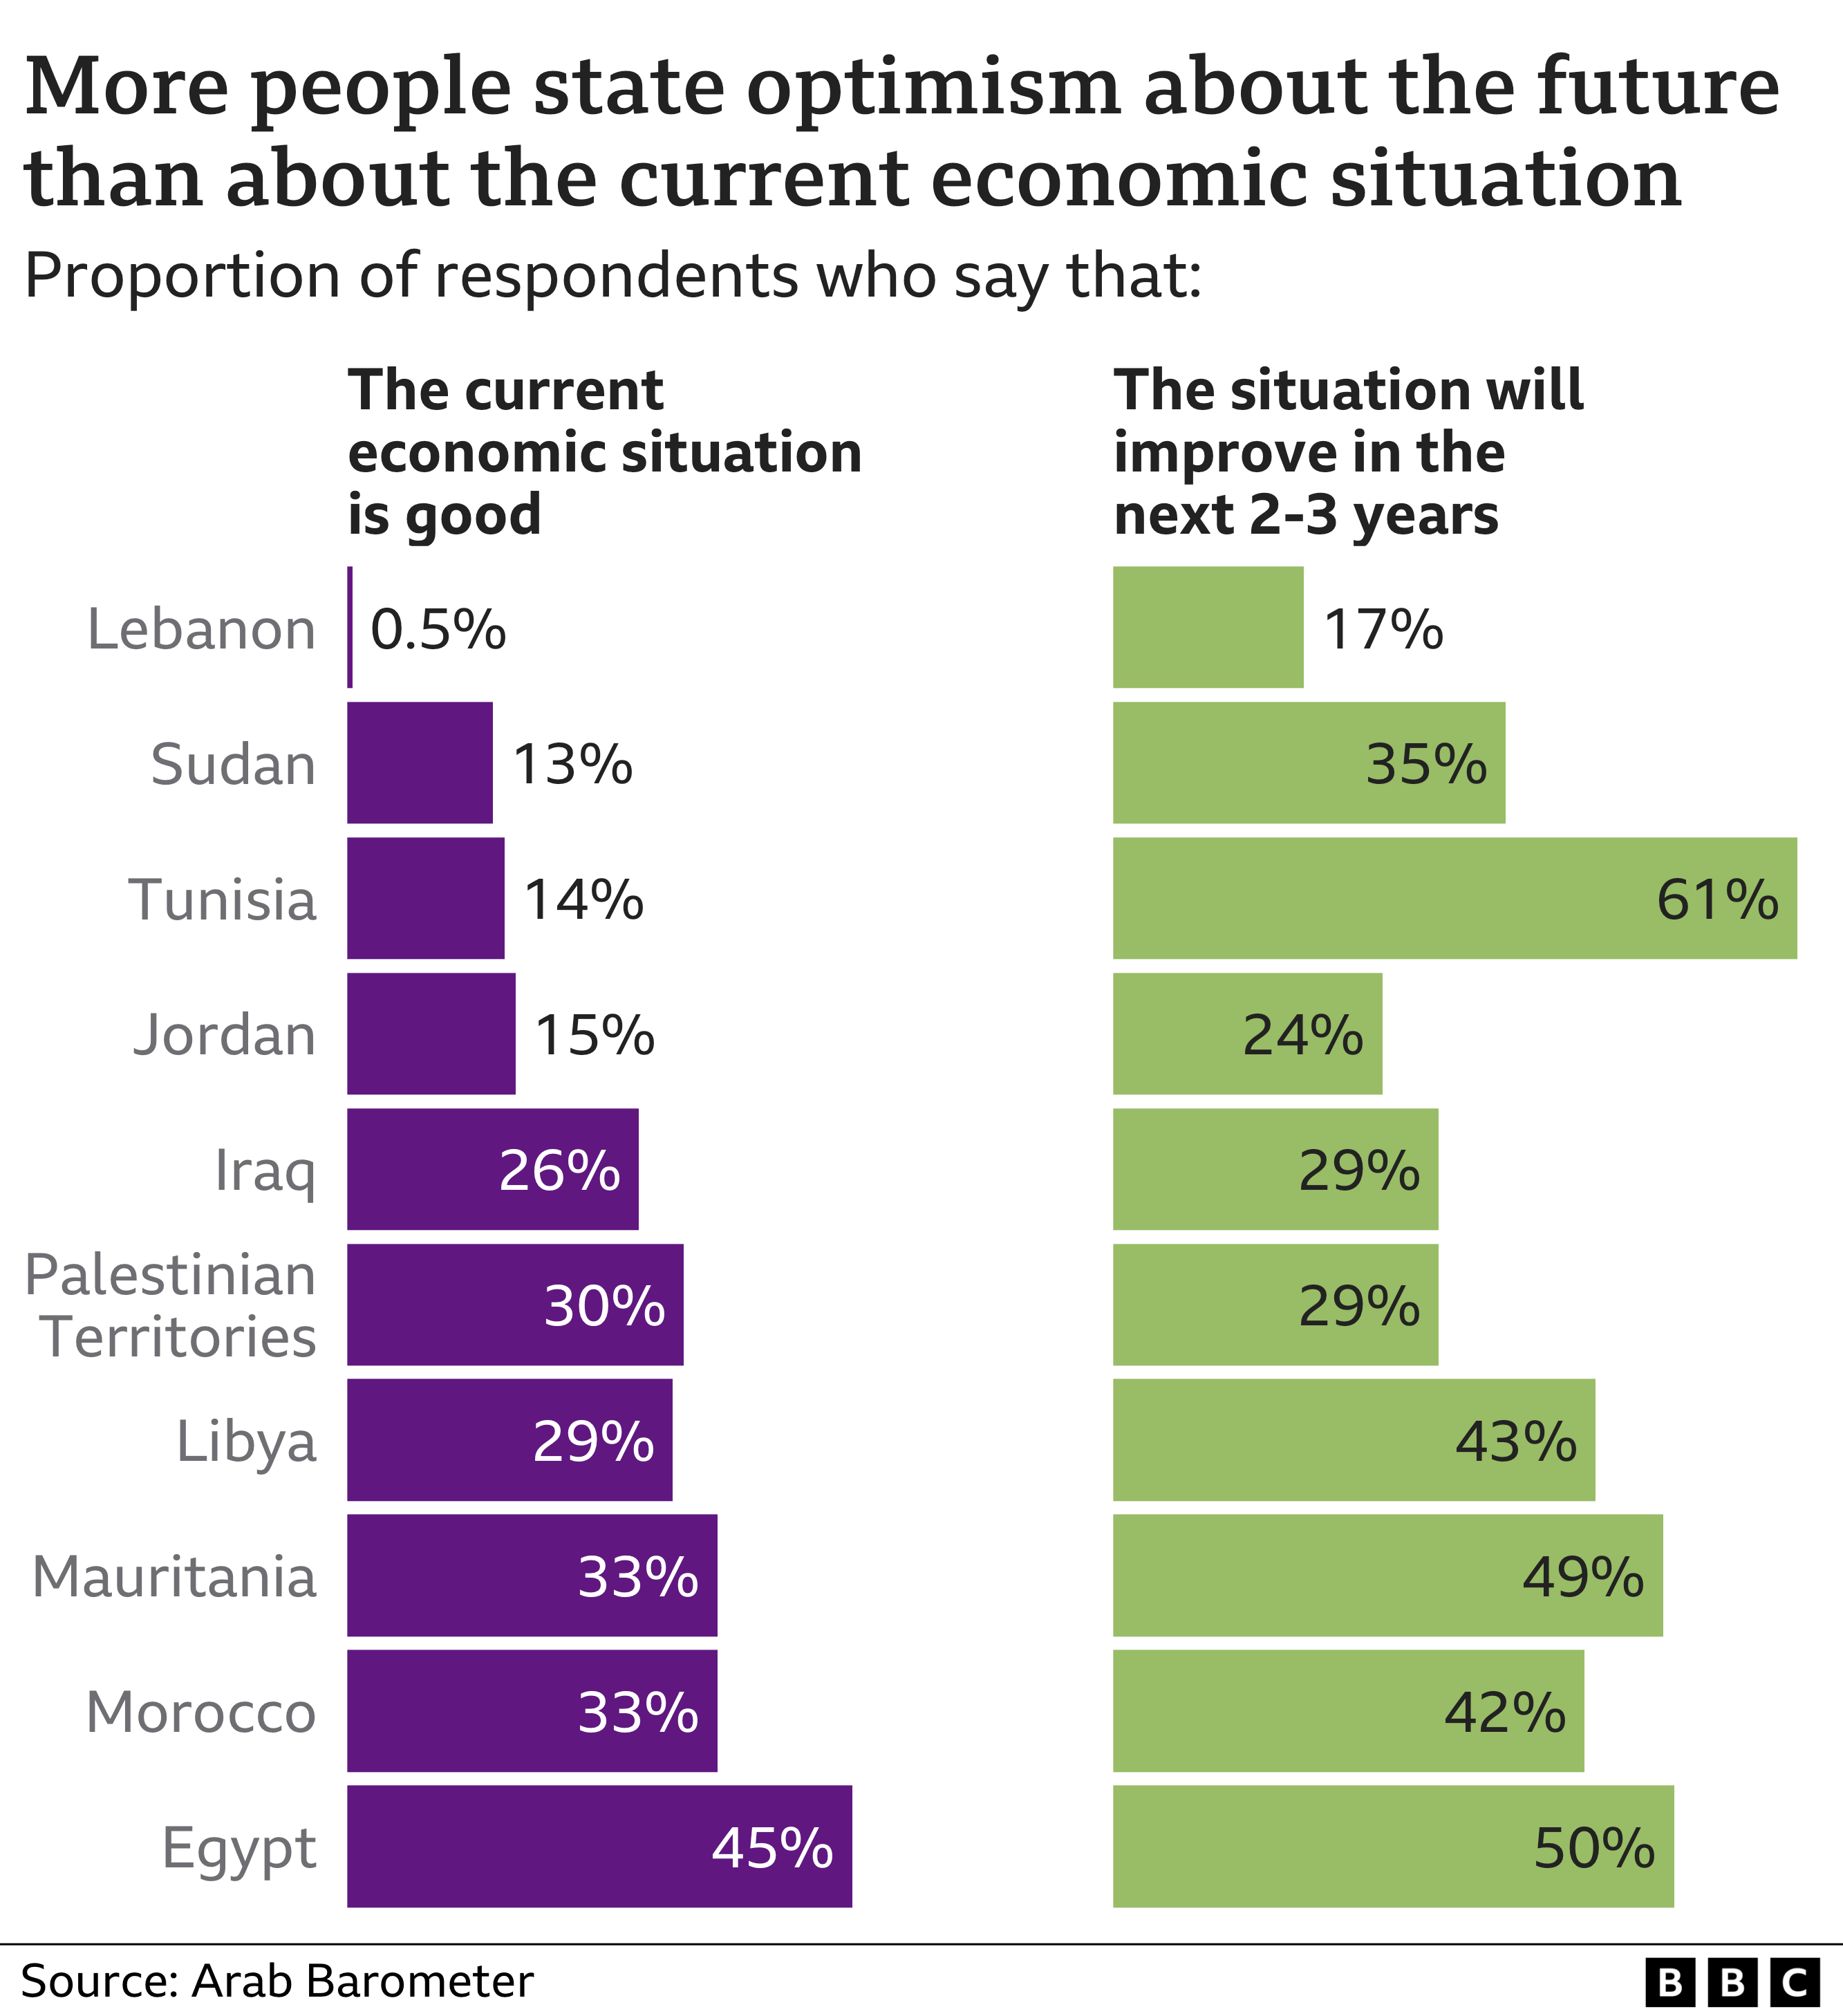 Chart comparing the proportion of respondents who believe the economy is currently good to those who believe it will improve in 2-3 years, by country. In Lebanon, a mere half a percent of all respondents would describe the economy is good, but they show more optimism for the future with 17% who believe the situation will improve. In Egypt, which has the most positive view of the present economy, 45% of respondents believe the situation is currently good and 50% believe it will improve. Tunisia has a dim view of the current economy (only 14% think it is good) but has the highest level of optimism for the future - some 61% of people agree.